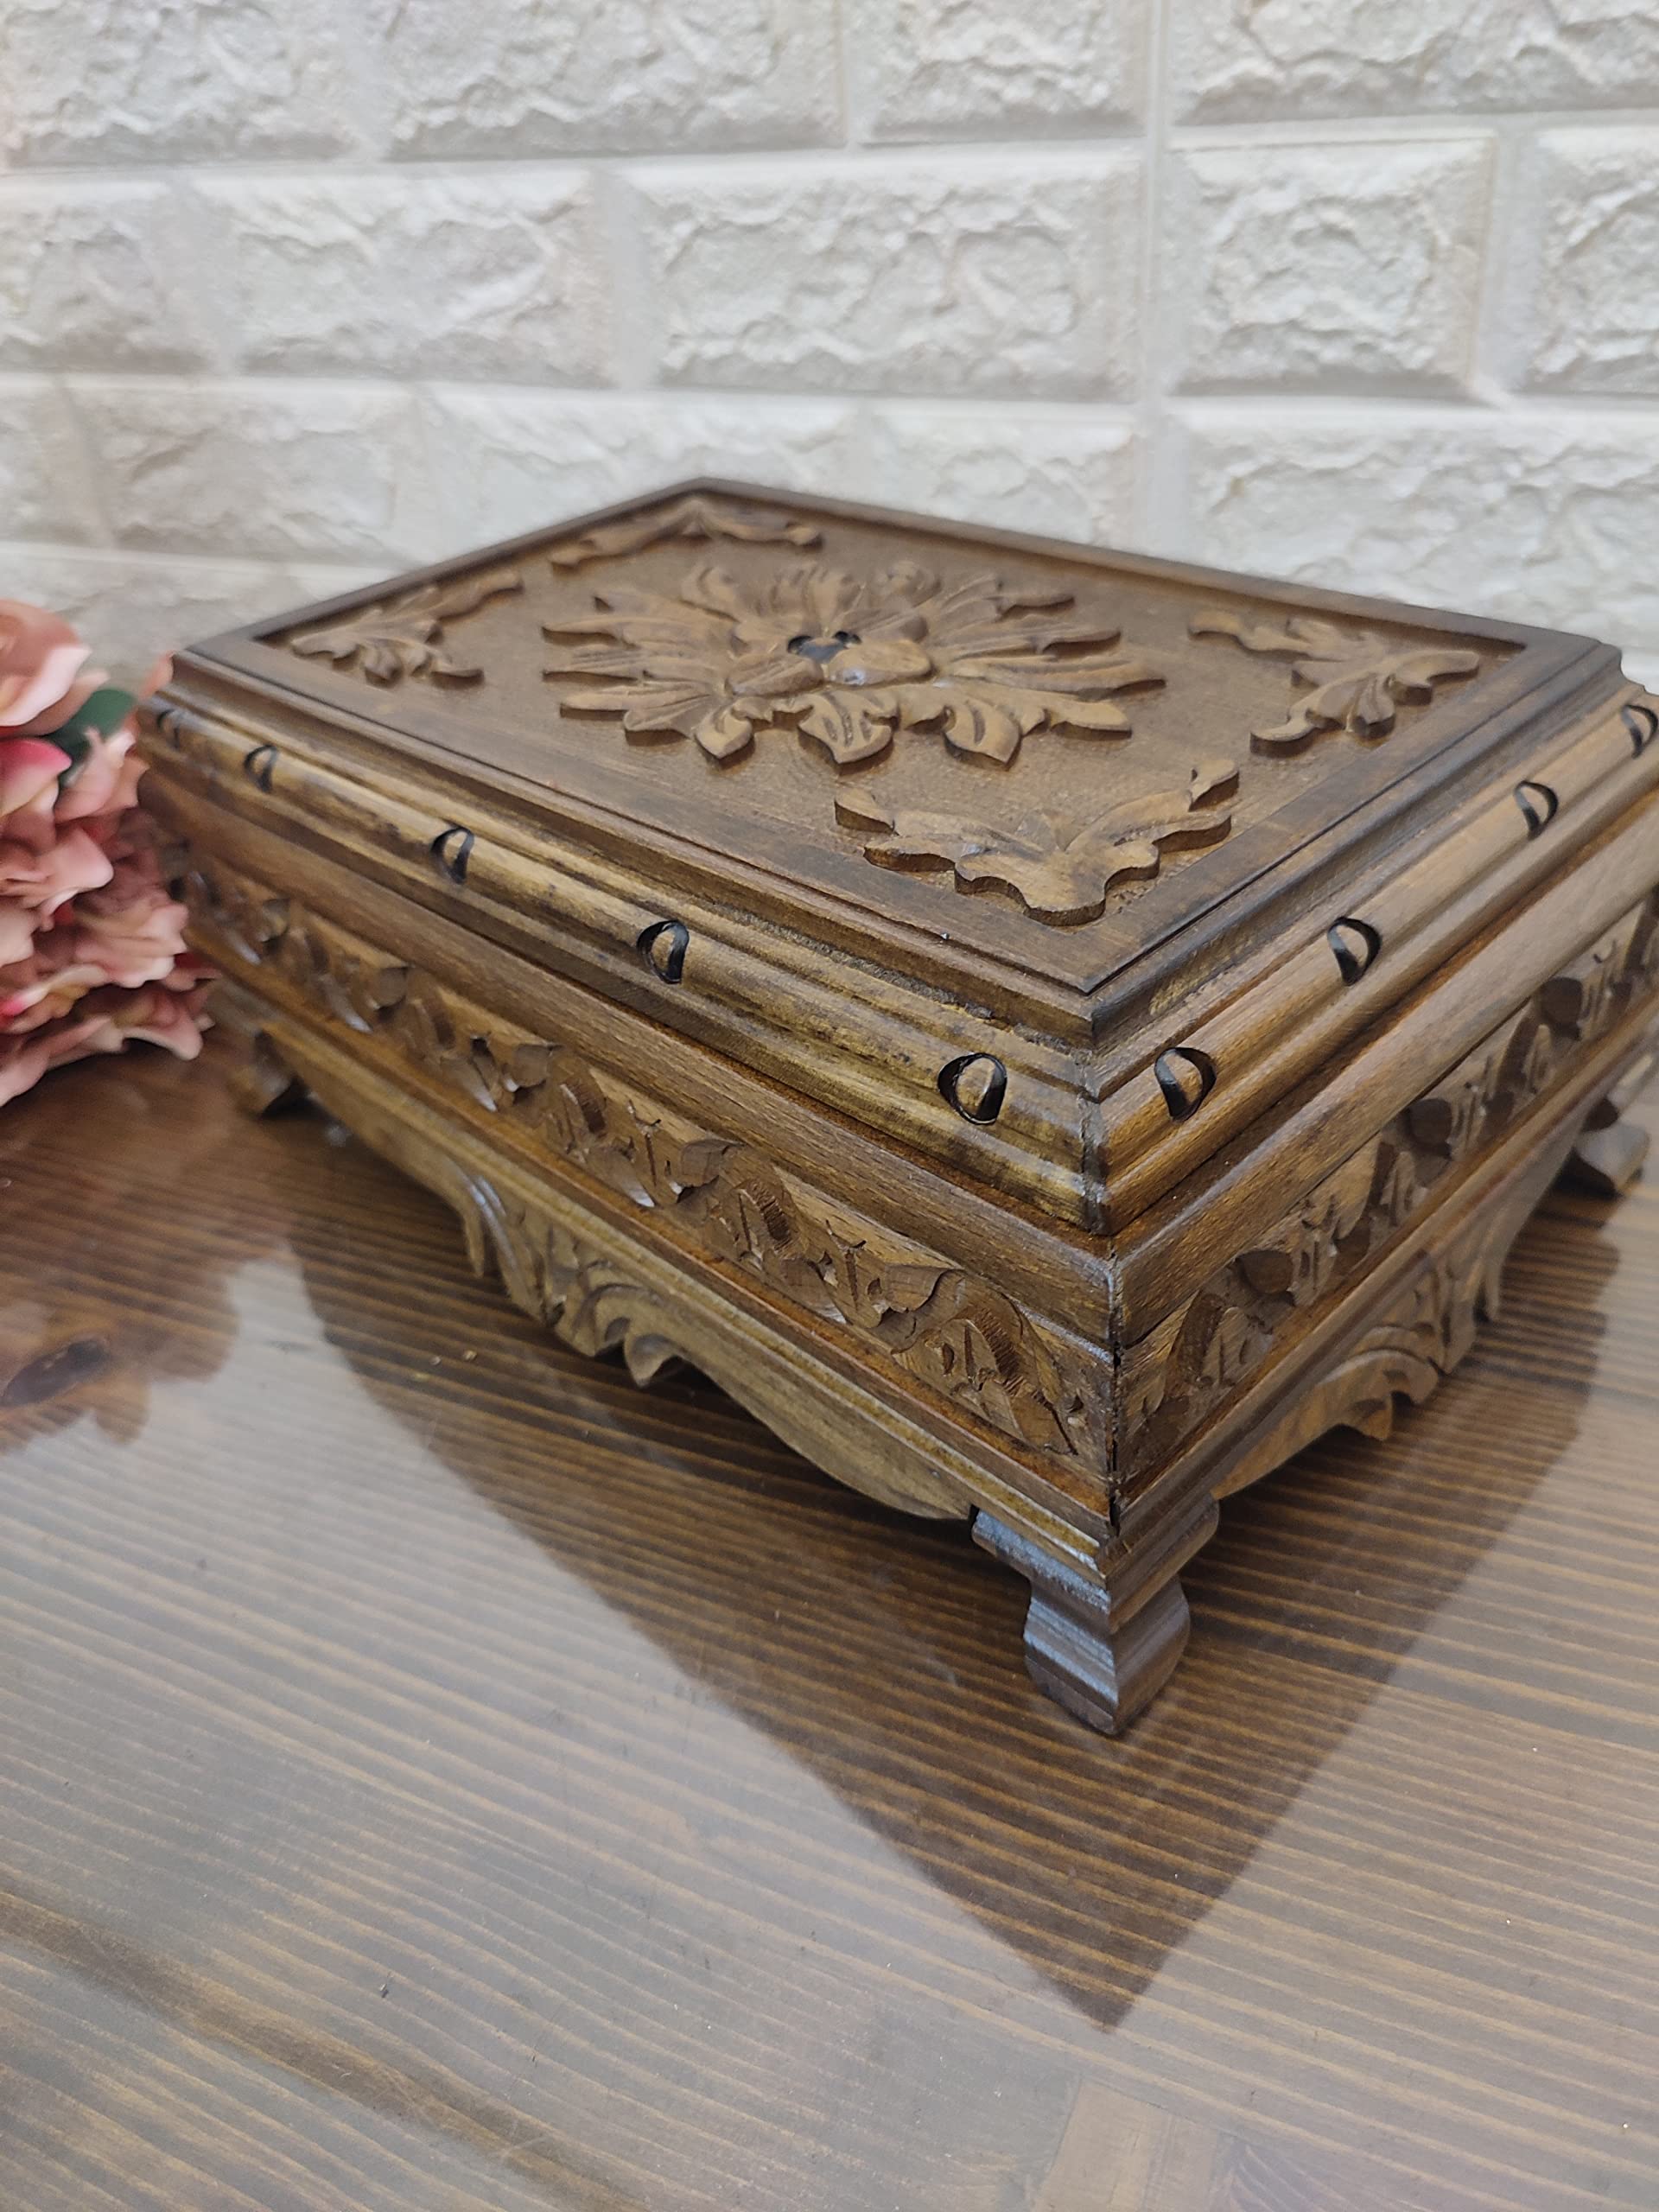 Functional and decorative wooden box